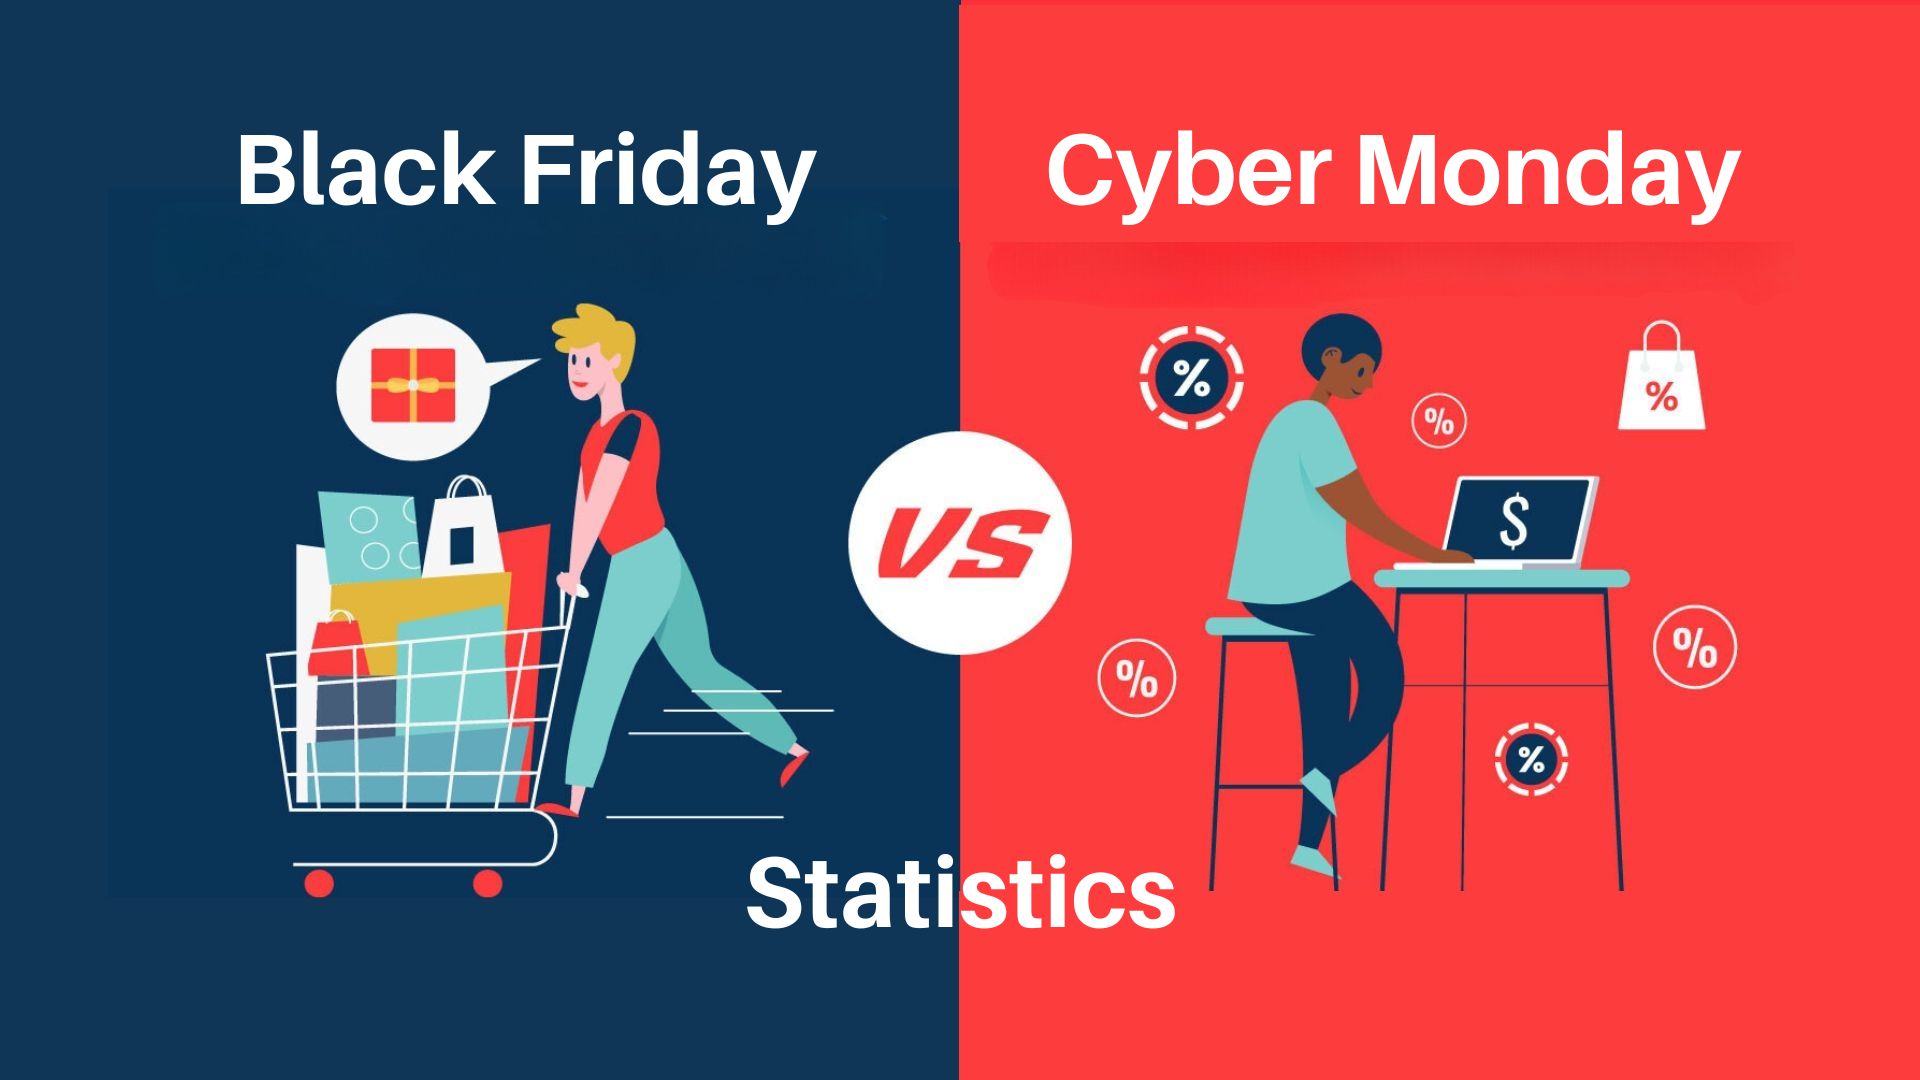 Black Friday Vs Cyber Monday Statistics 2023 – By Spending, Shopping Place, Total Sales, Type of Store